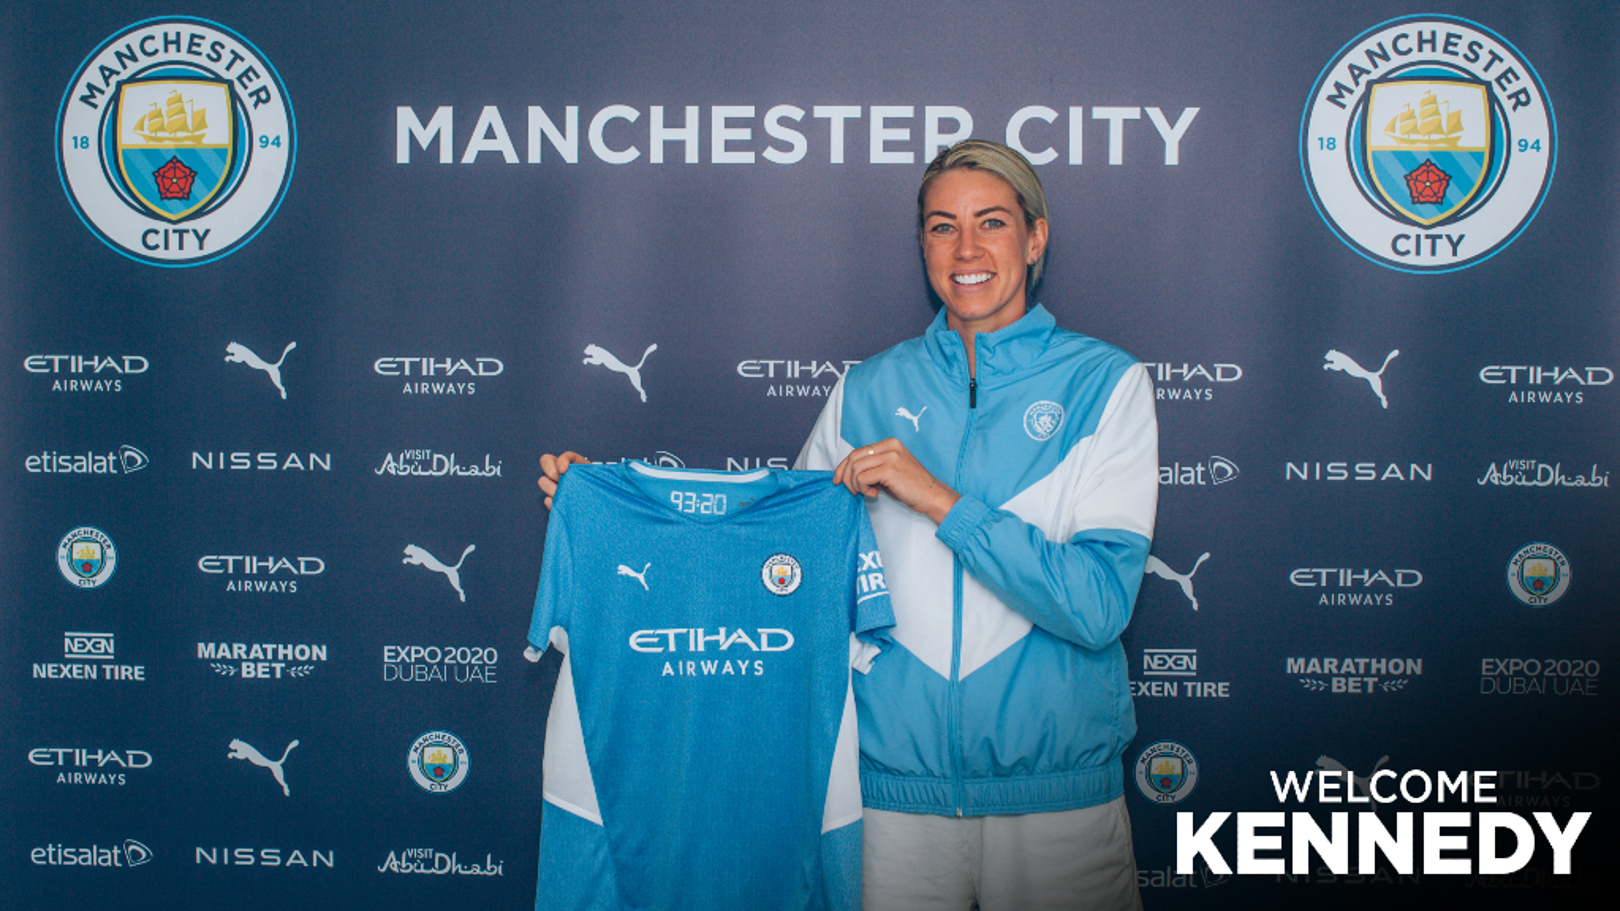 Alanna Kennedy joins Manchester City on a two-year deal